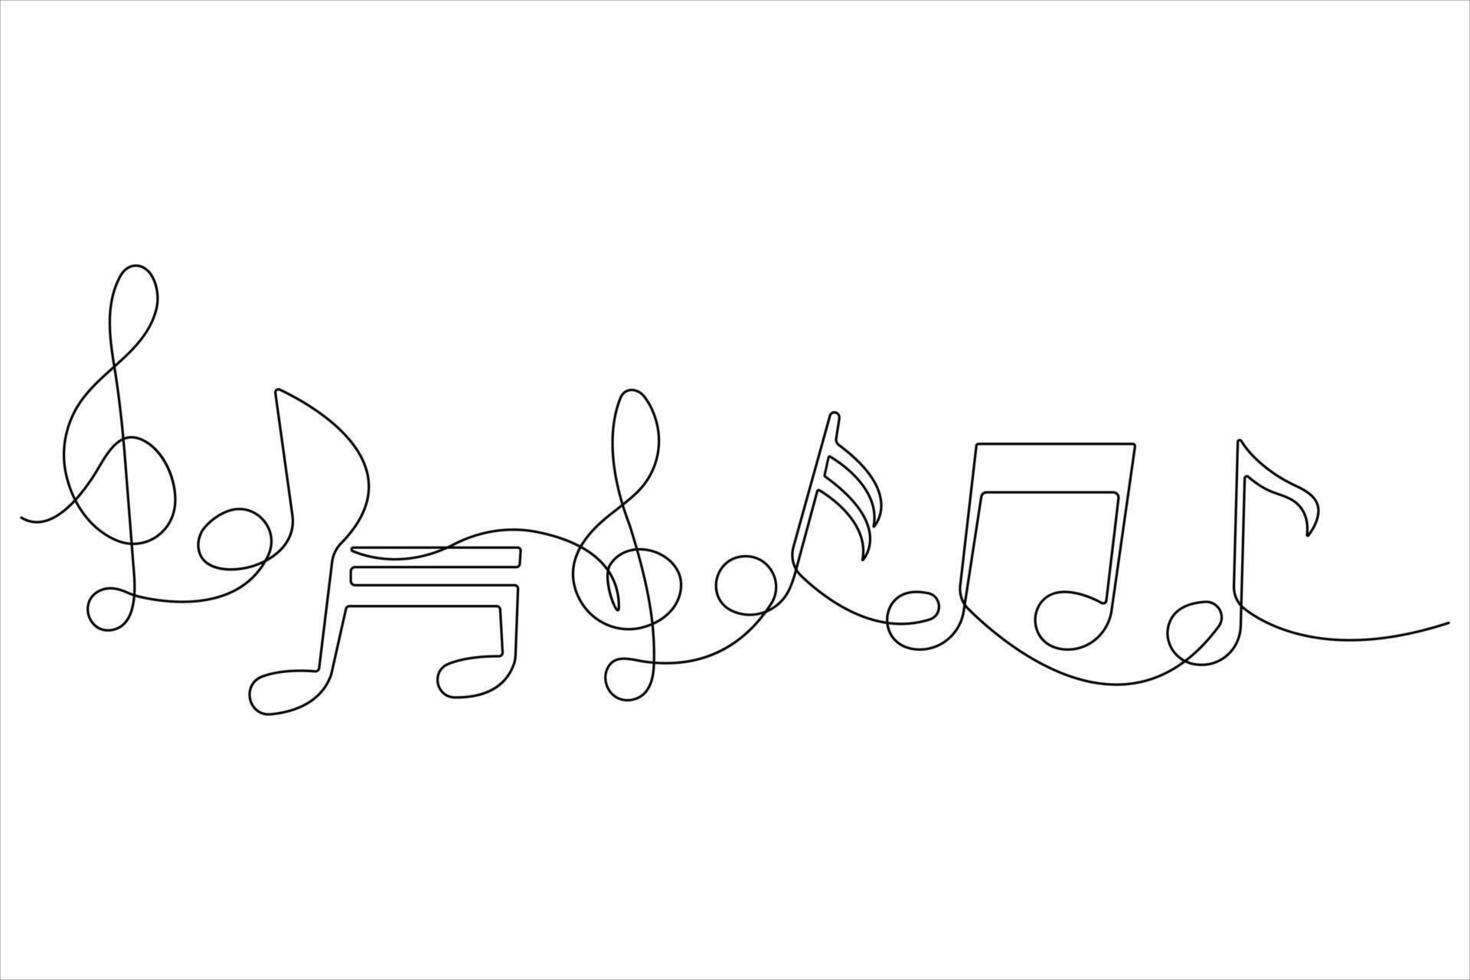 Multiple musical notes continuous one line art musical symbols and outline vector